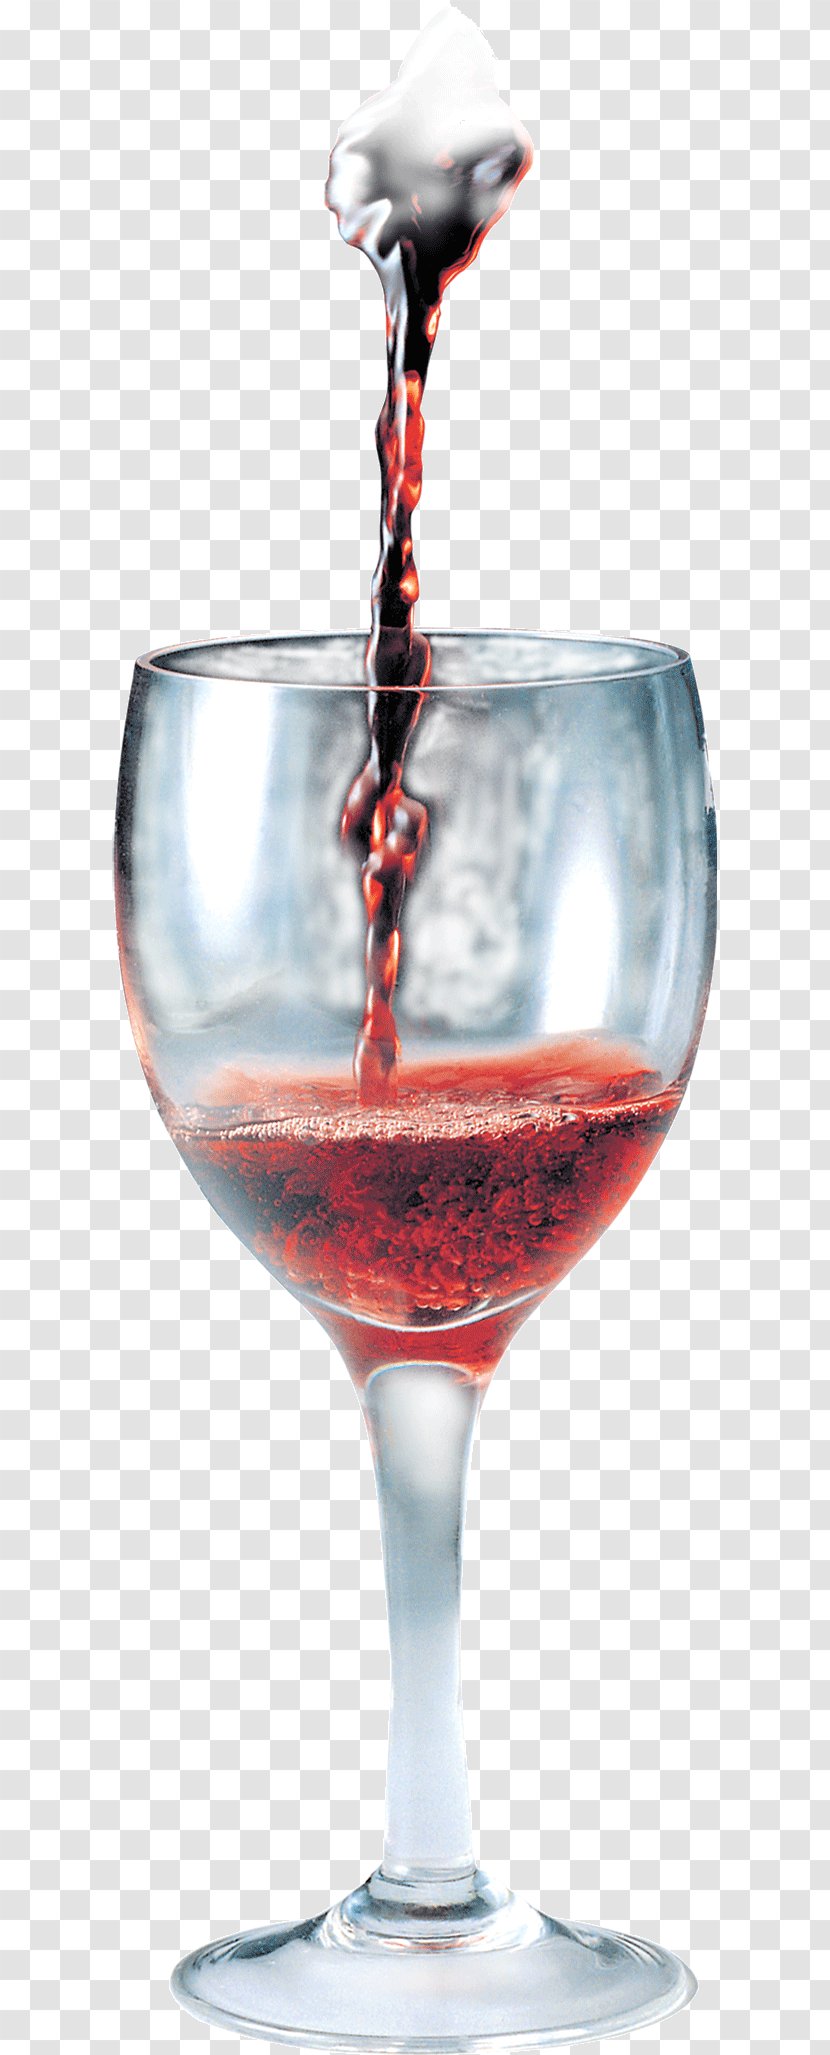 Red Wine Juice Glass Cocktail - Cup - Wineglass Transparent PNG